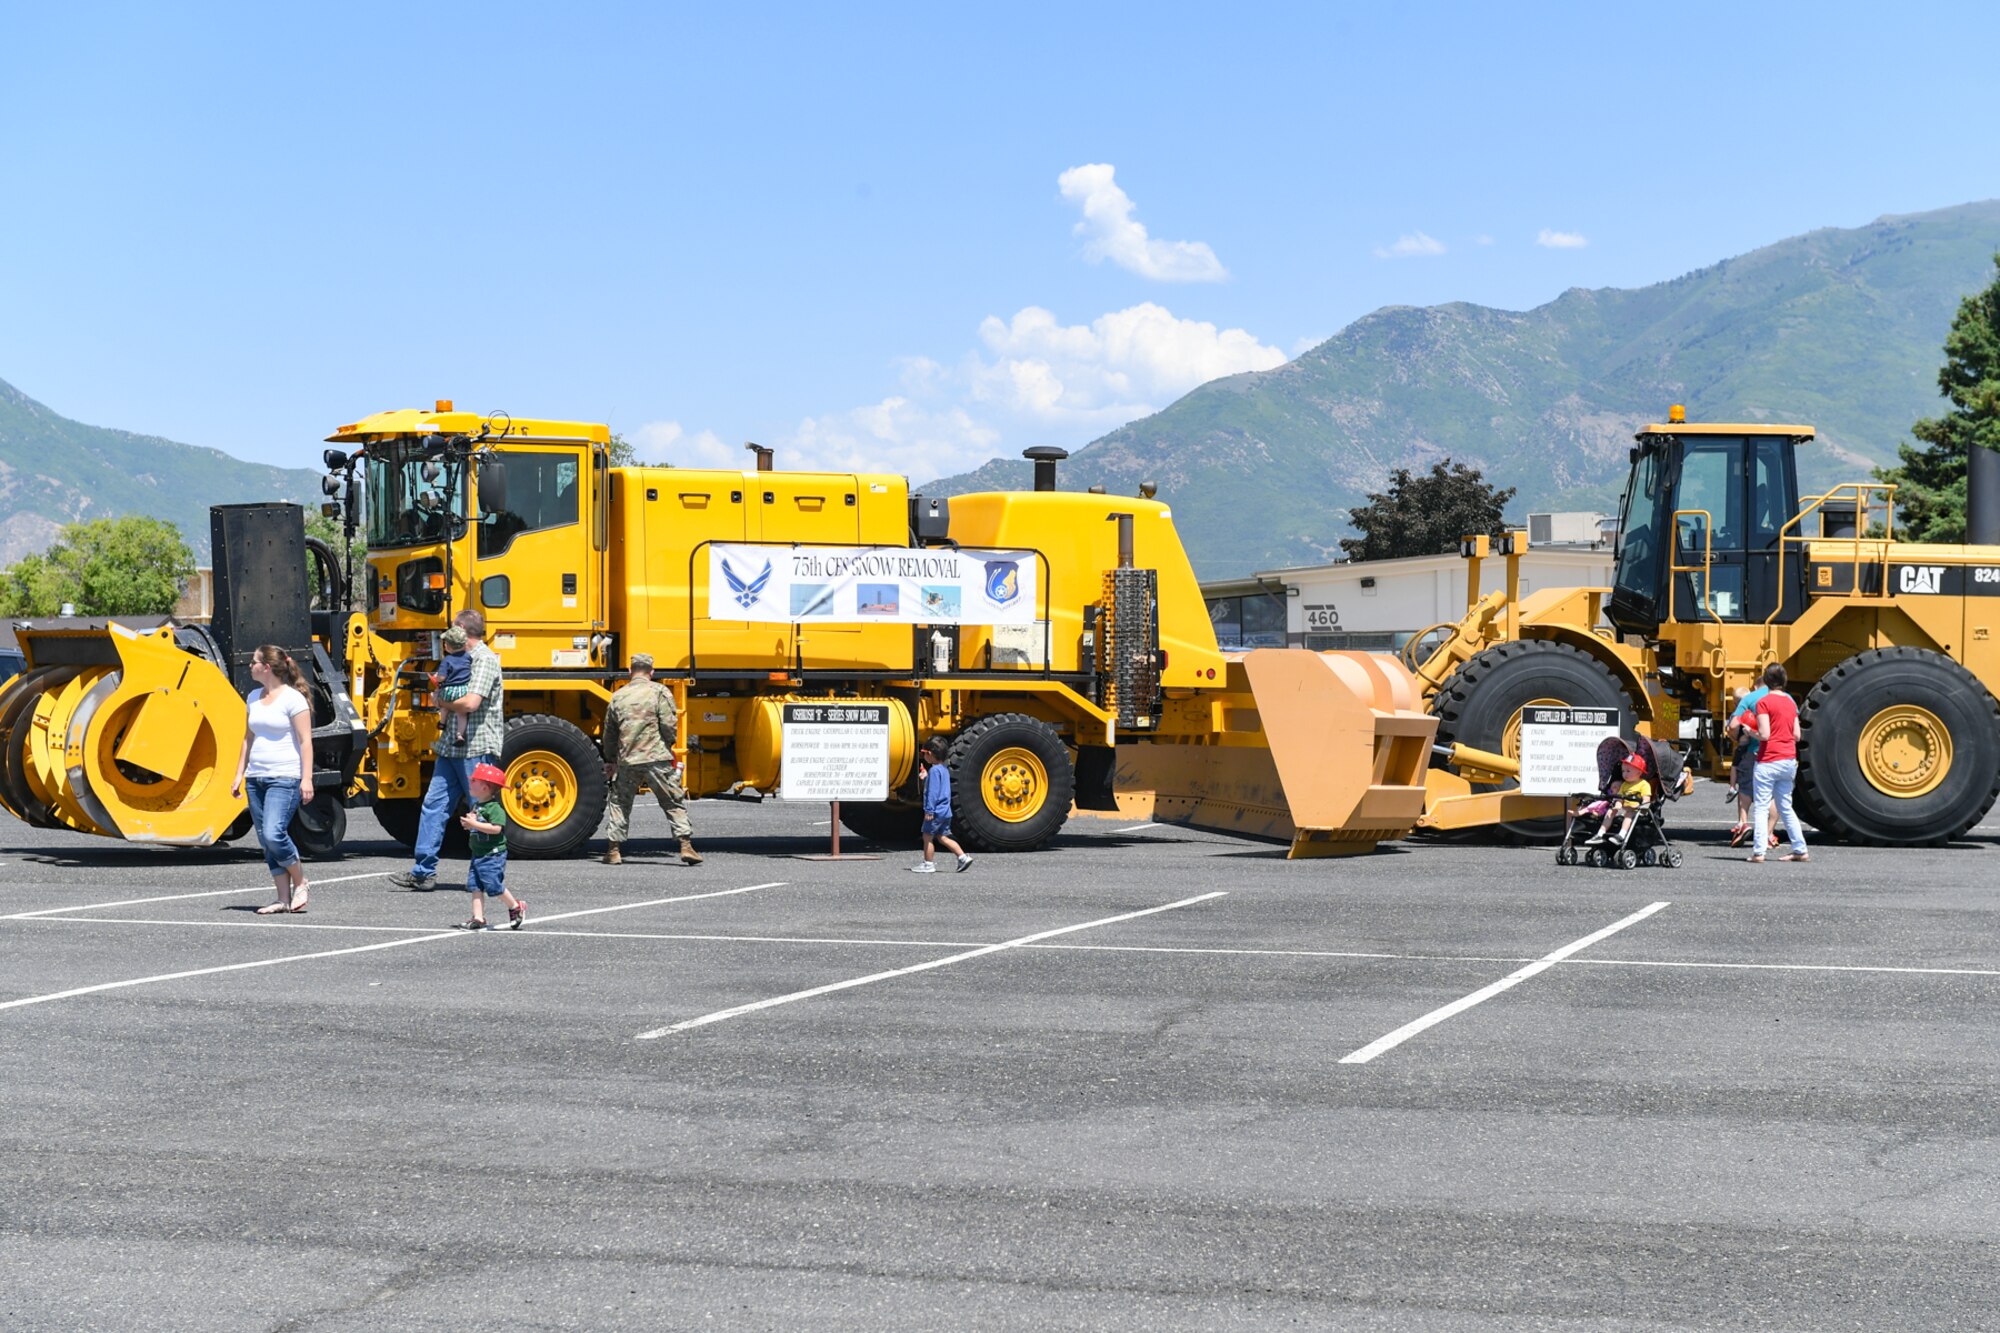 Visitors view snow removal vehicles from the 75th Civil Engineering Squadron during Wheels of Wonder June 8, 2018, at Hill Air Force Base, Utah. Wheels of Wonder provides base families a fun, hands-on experience exploring various types of vehicles. (U.S. Air Force photo by Cynthia Griggs)